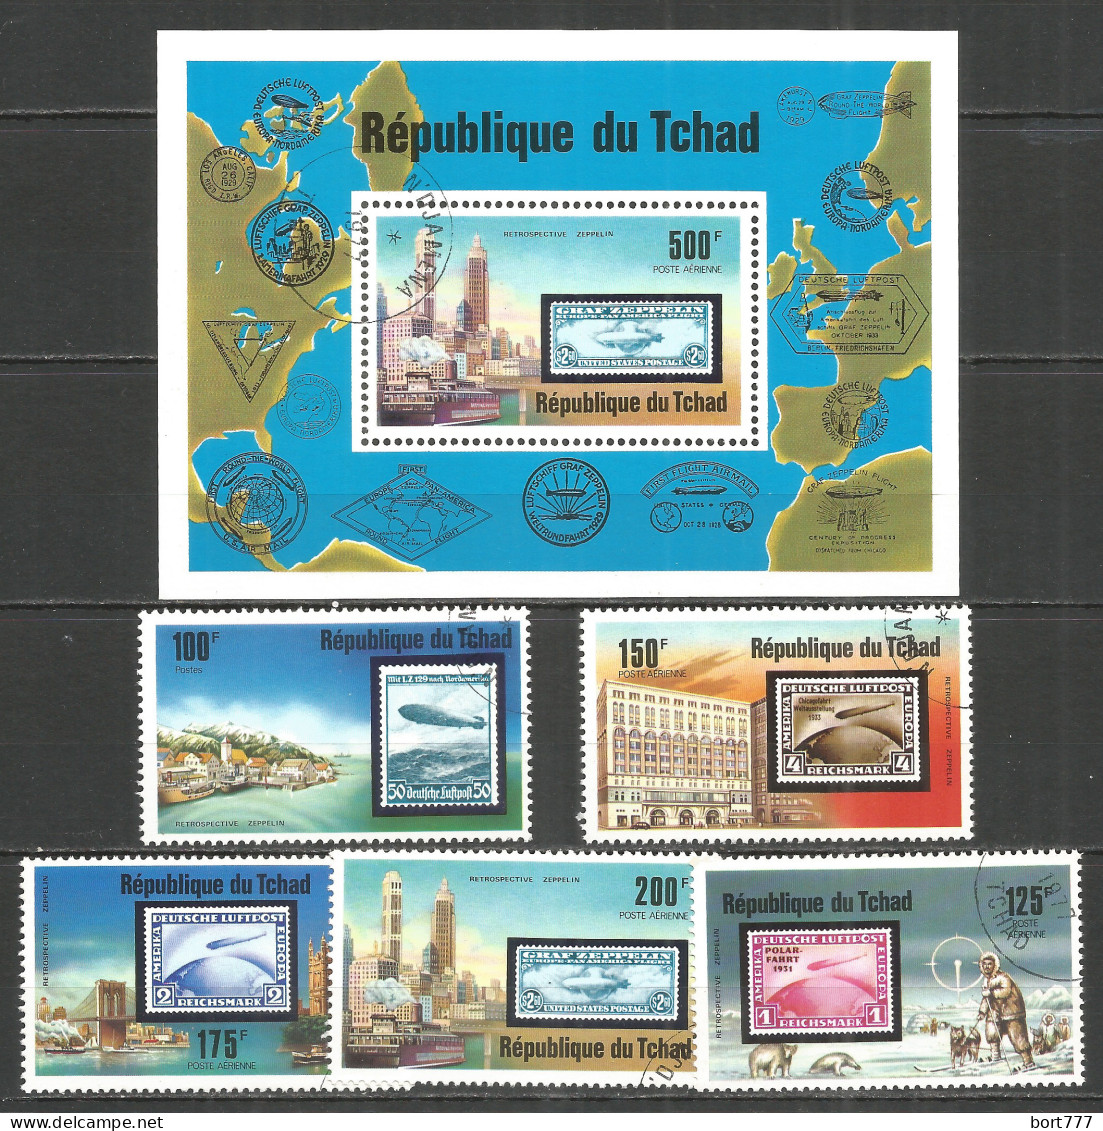 Chad 1977 Used Stamps Set And Block - Chad (1960-...)